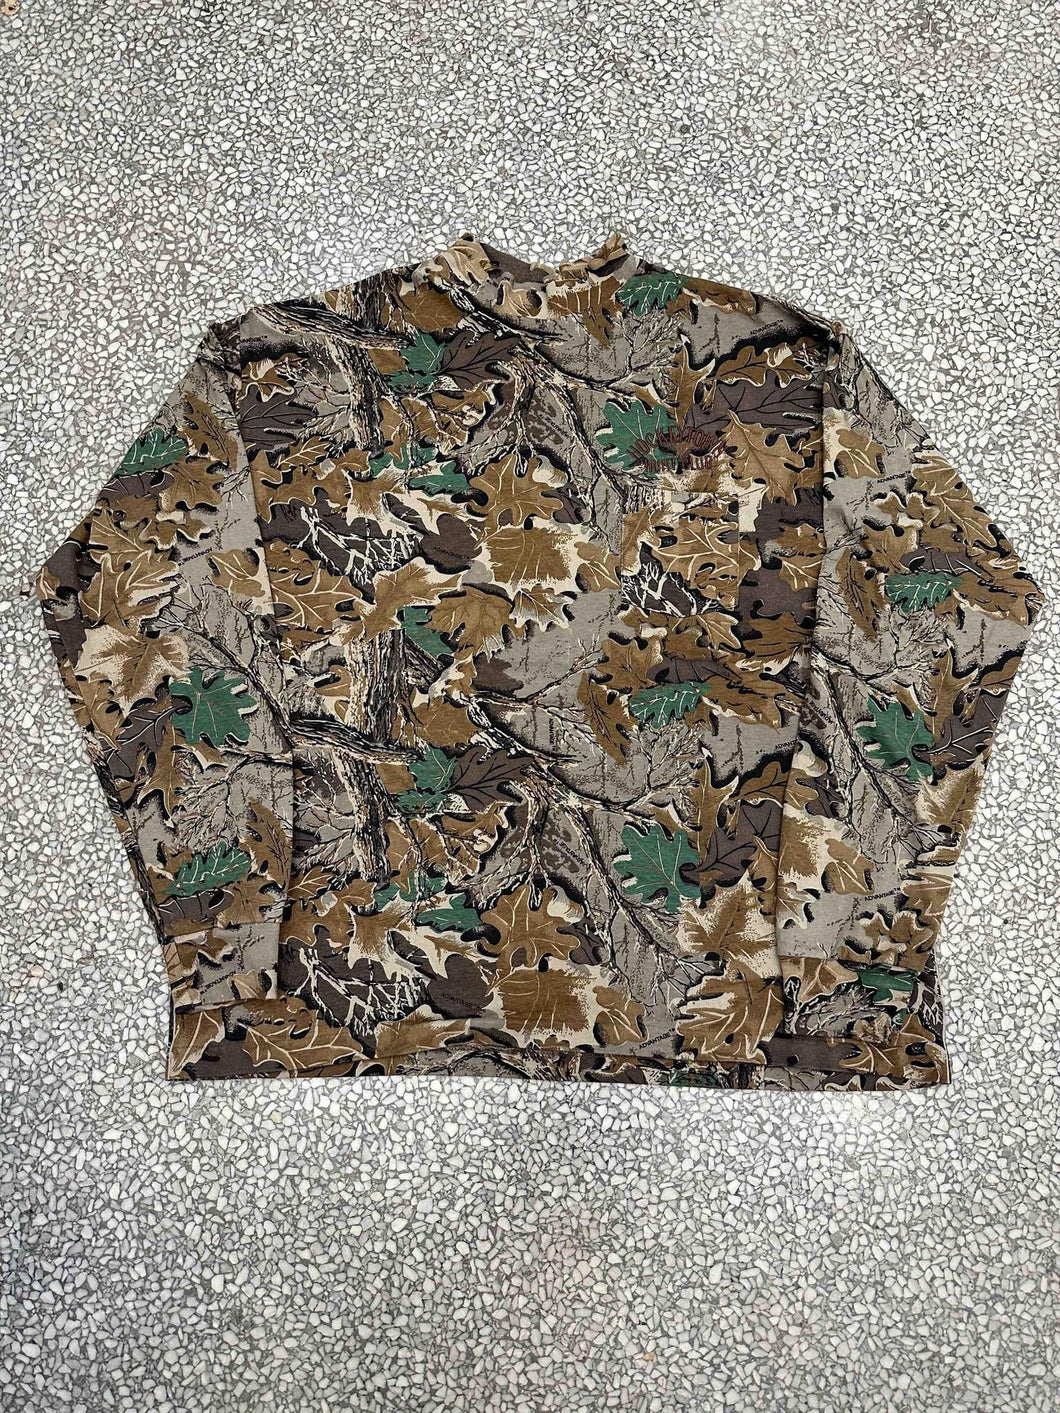 Detroit Red Wings Hockeytown Hunt Club Vintage 90s Pocket Turtle Neck L/S Shirt Real Tree Camo ABC Vintage 